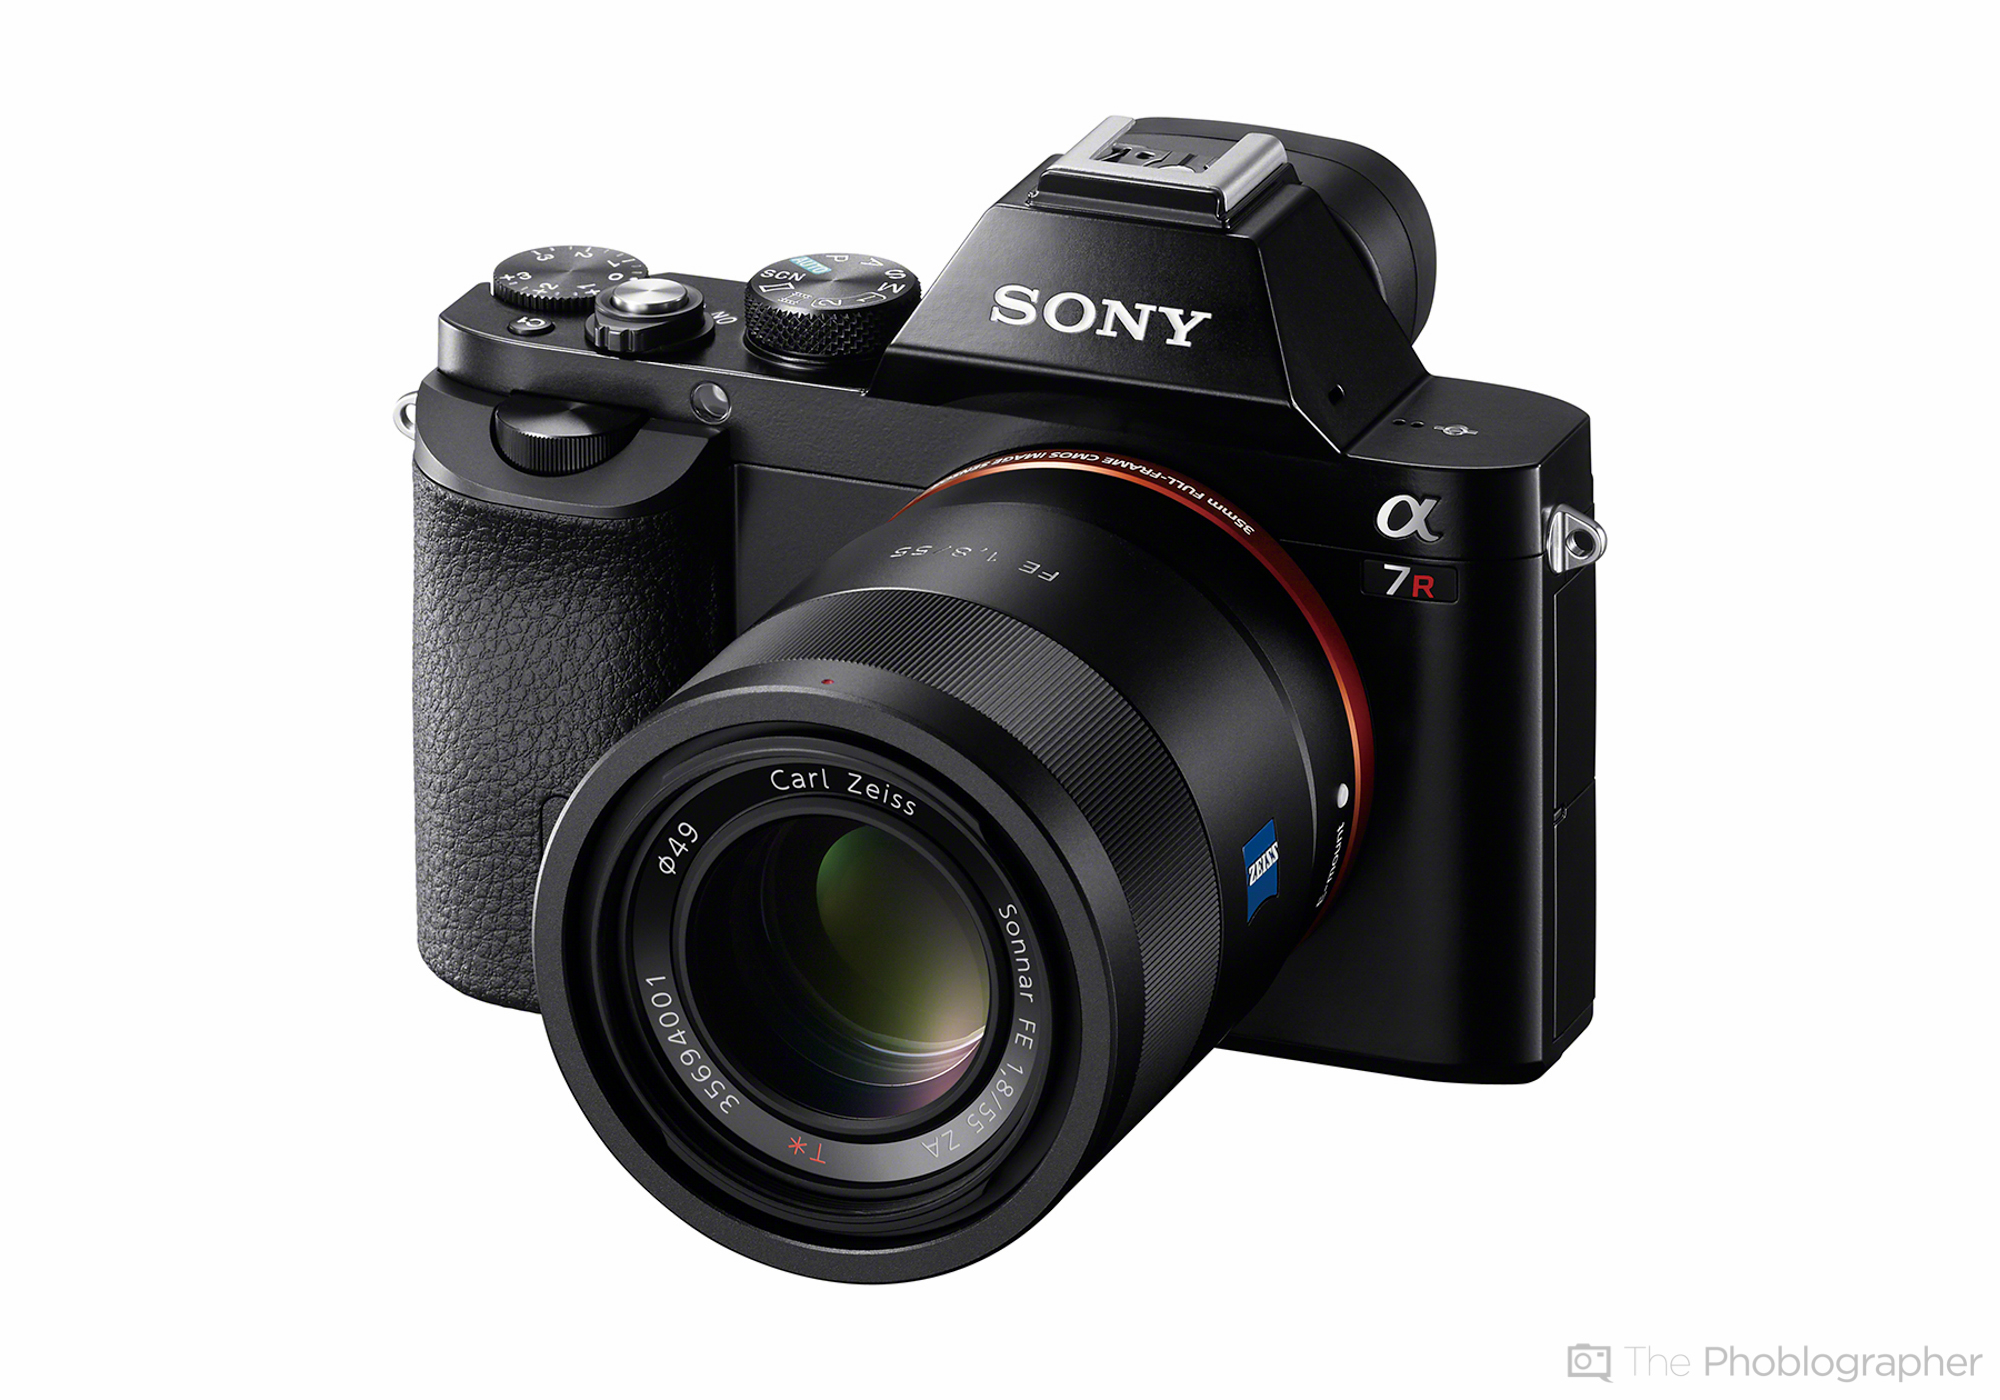 Sony Announces Improved Autofocus Speed for the A7r/A7 in New Firmware Update